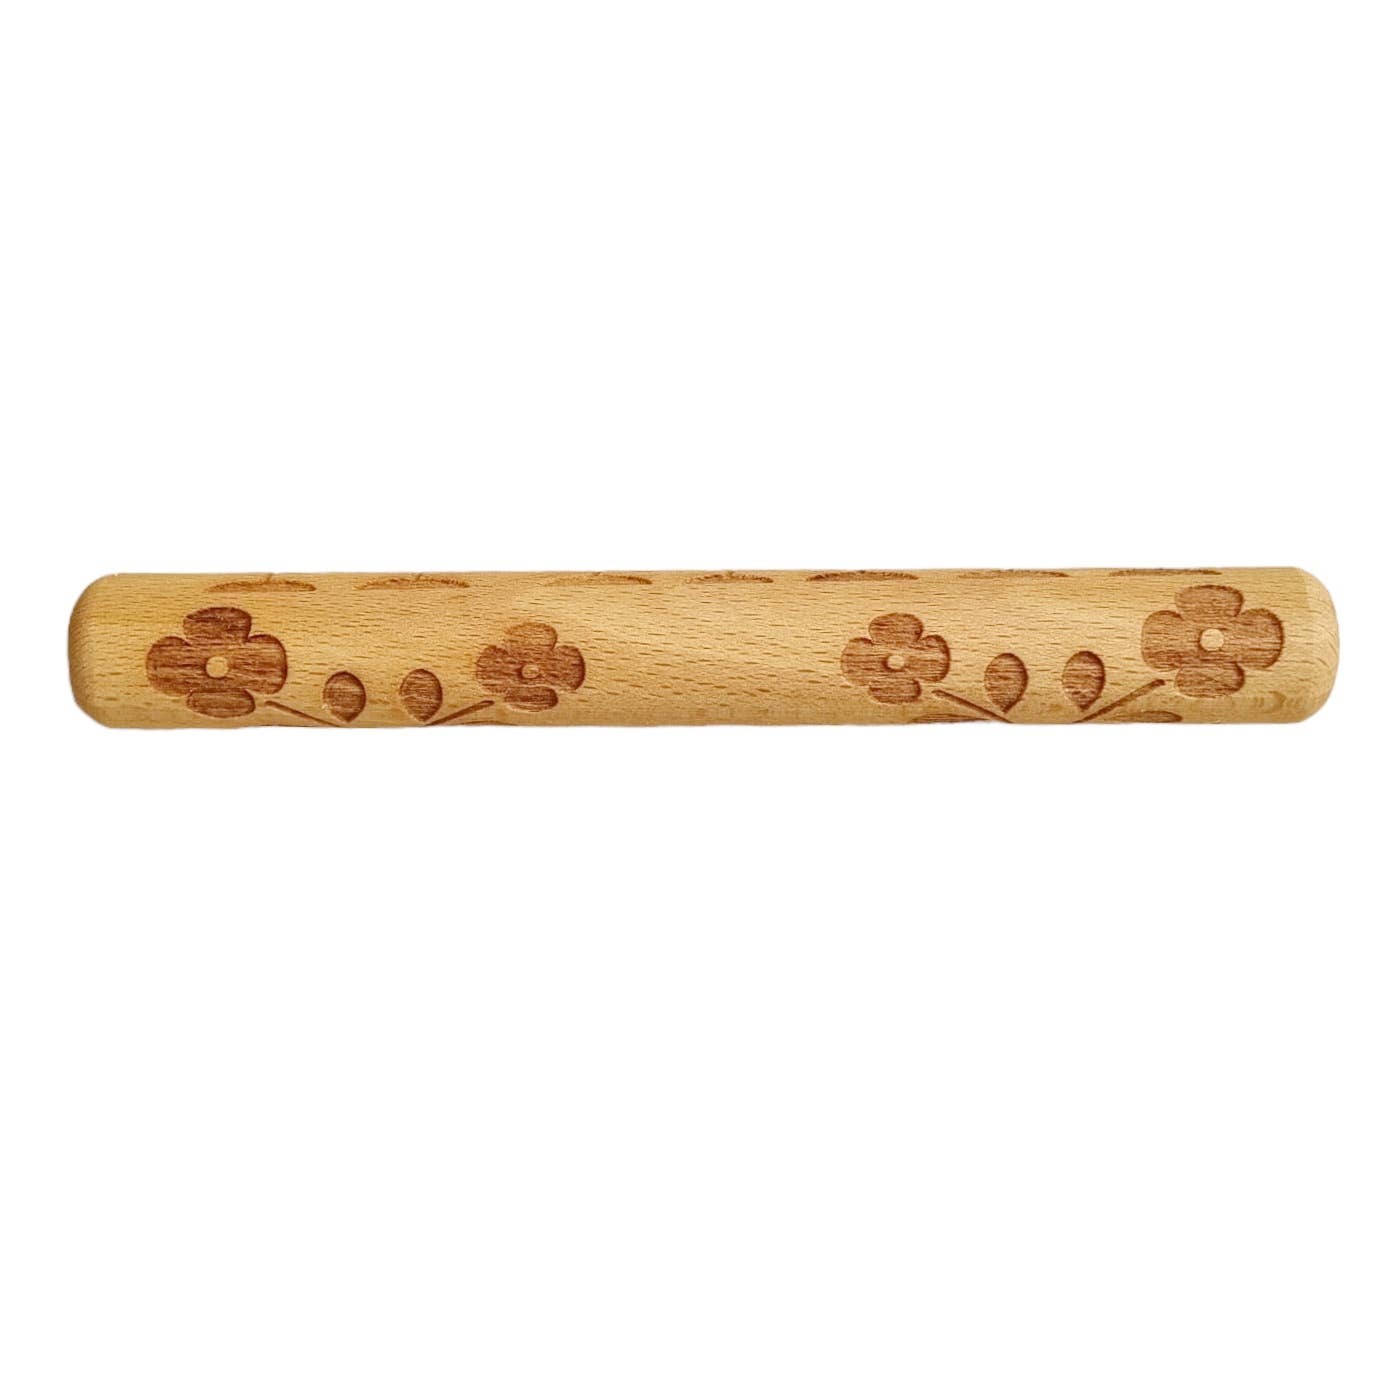 Flowers Wooden Roller, Introducing our Flowers Wooden Roller.This unique and charming roller is the perfect addition to your child's art and sensory playtime. Made from high-quality wood, this Flowers Wooden Roller is designed to create texture and relief as your little ones roll out their clay creations. The Flowers Wooden Roller features a fun flower pattern, perfect for playful and imaginative minds. Ideal for open-ended play, this roller is perfect for unleashing your child's creativity and letting them